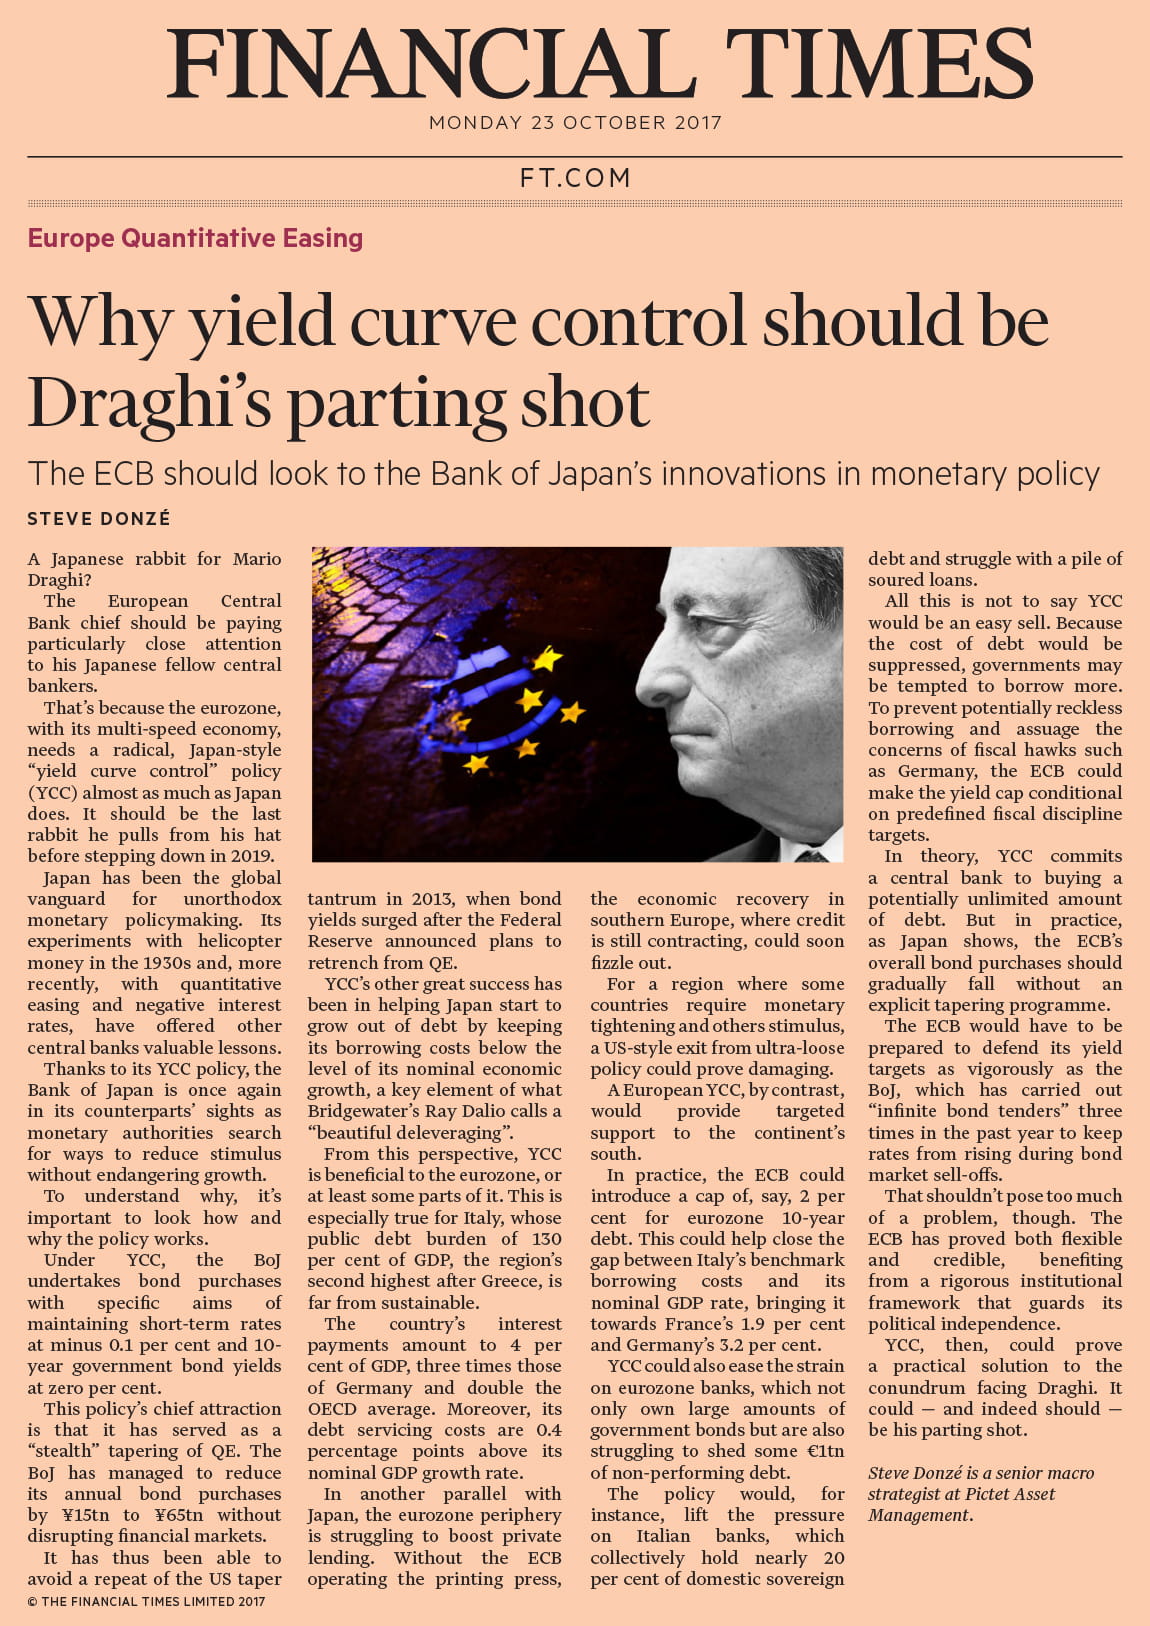 FT_201710_Why-yield-curve-control-should-be-Draghi’s-parting-shot_Donze